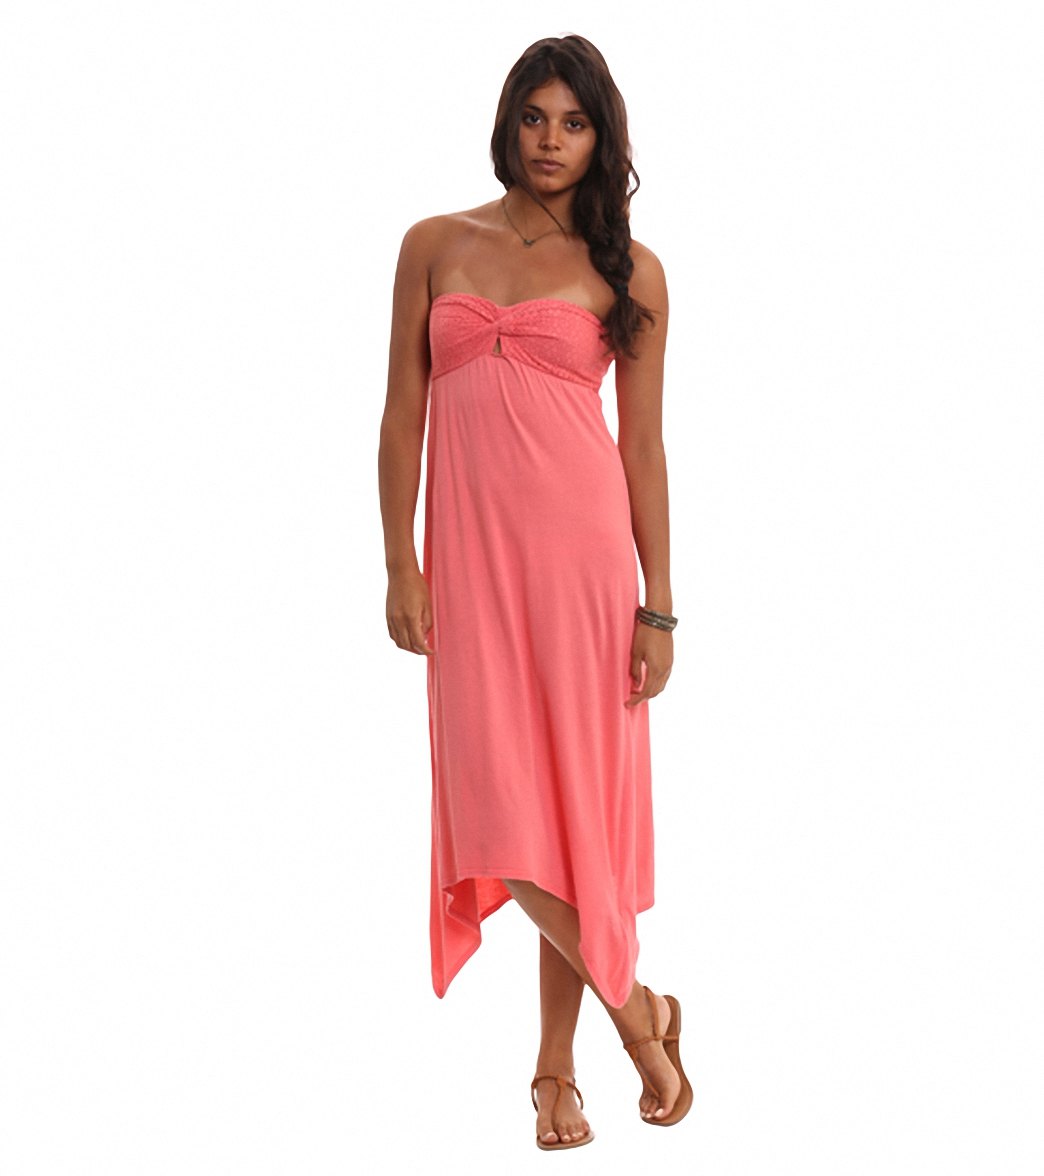 Roxy Sunny Shores Solid Strapless Dress at SwimOutlet.com